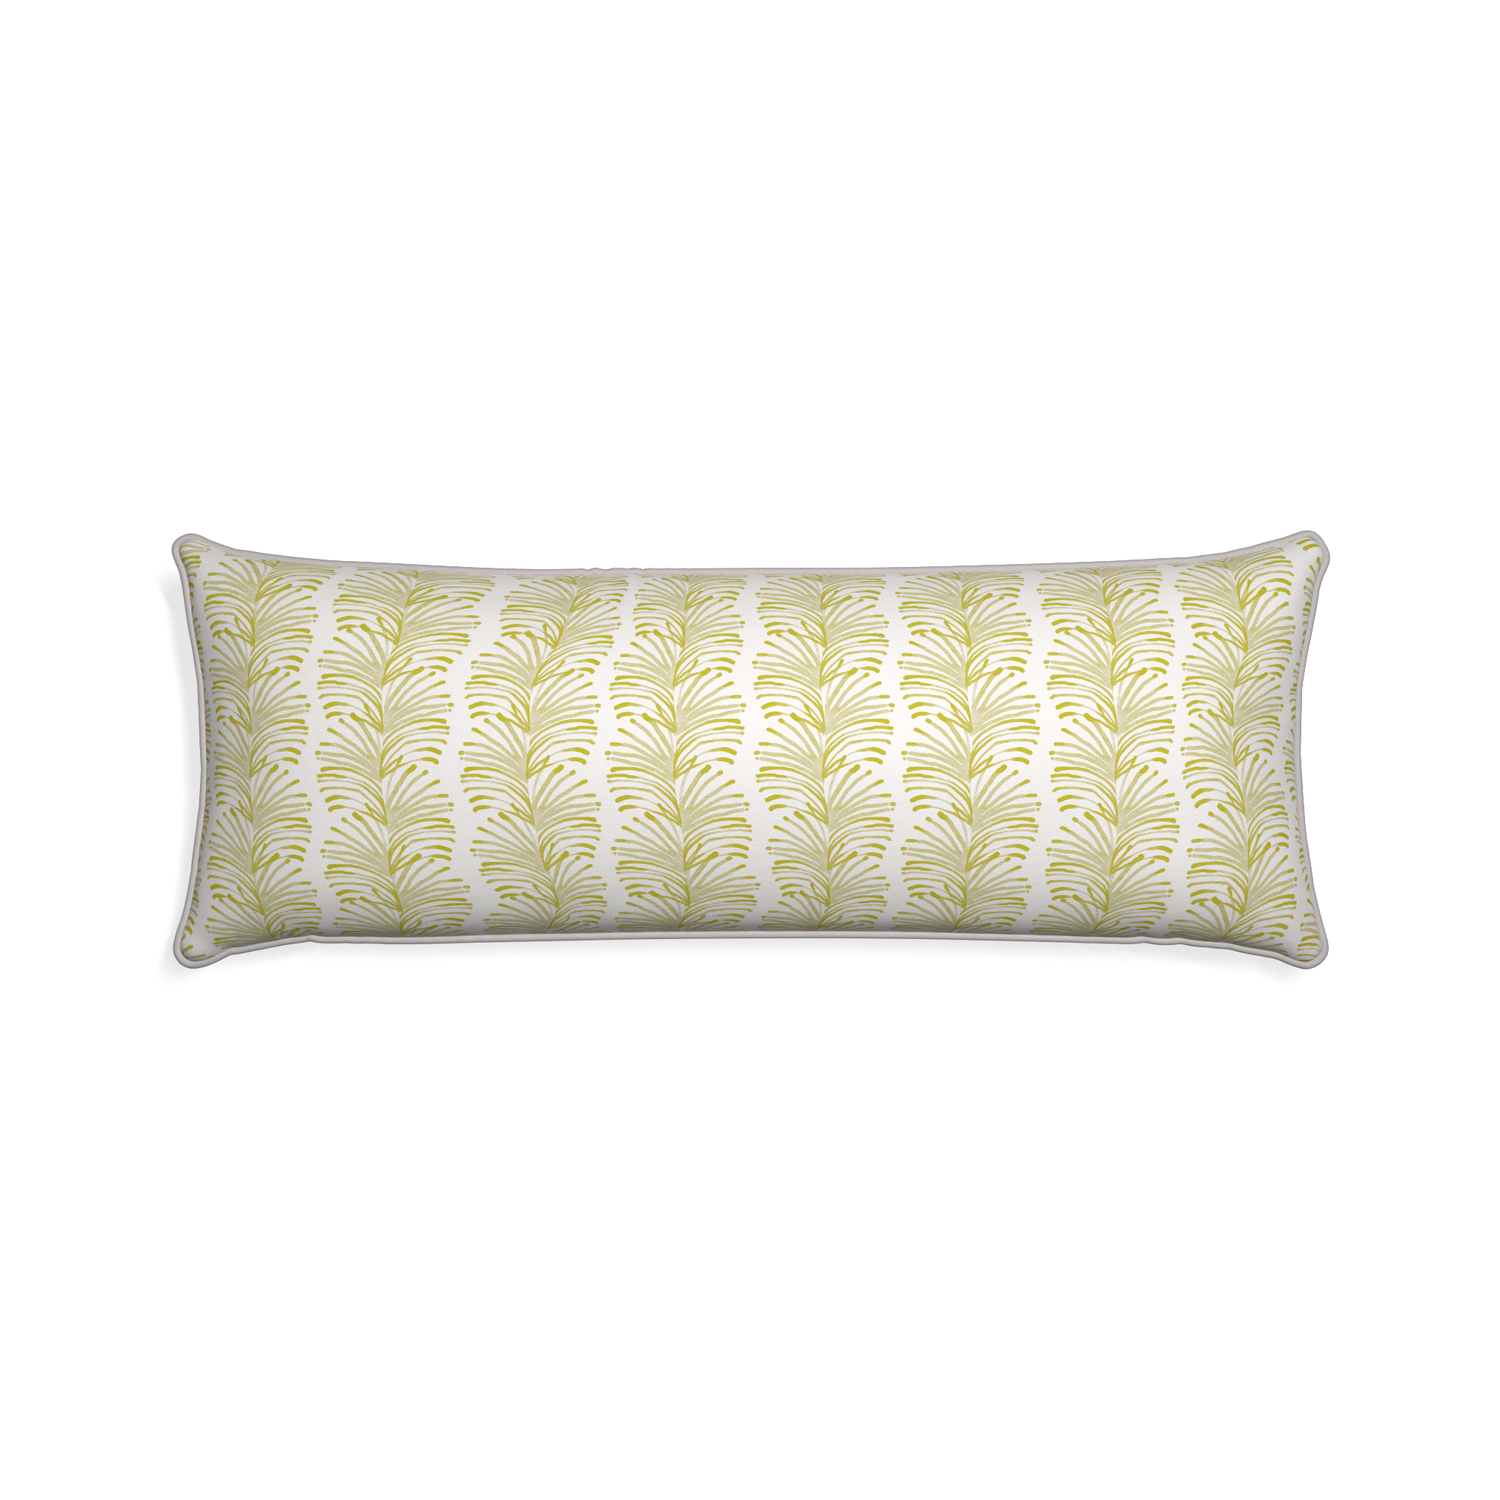 Xl-lumbar emma chartreuse custom yellow stripe chartreusepillow with pebble piping on white background